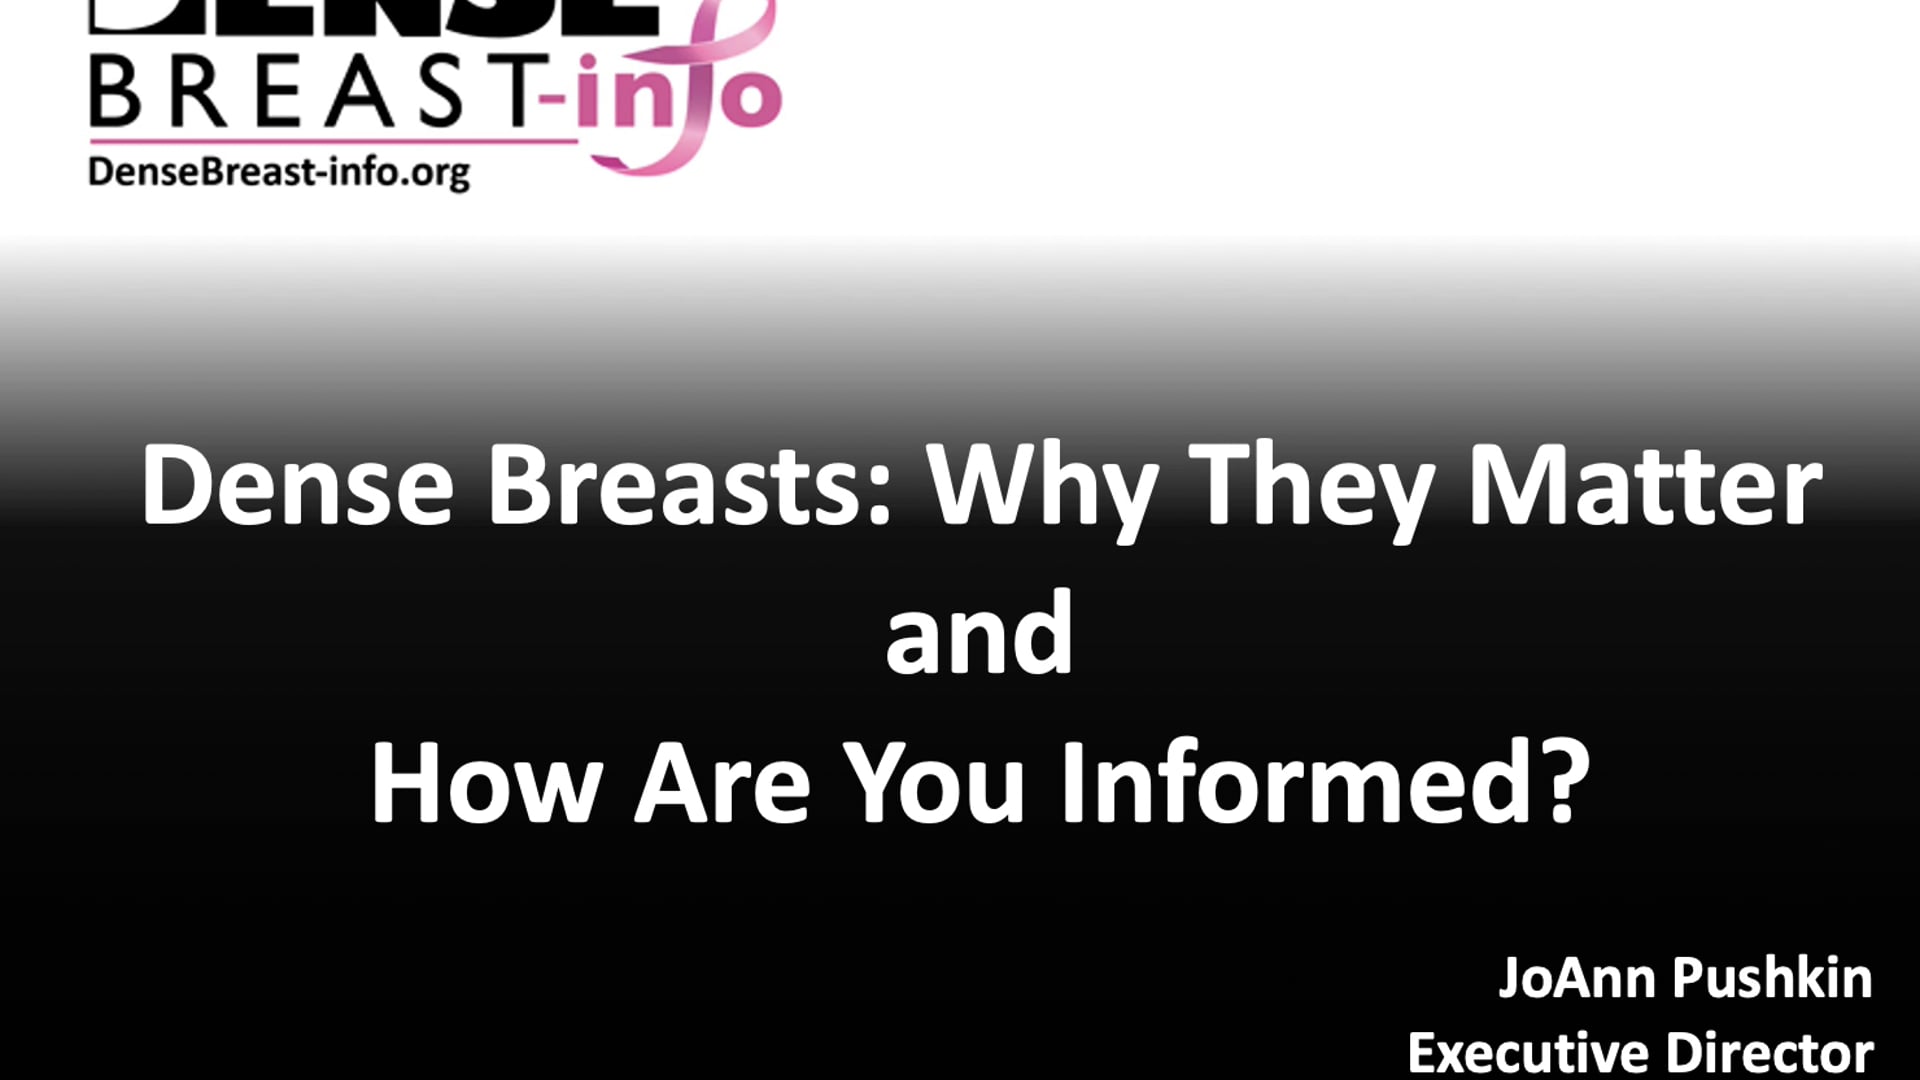 "Dense Breasts: Why They Matter and How Are You Informed?" – Right Breast Cancer Screening for You